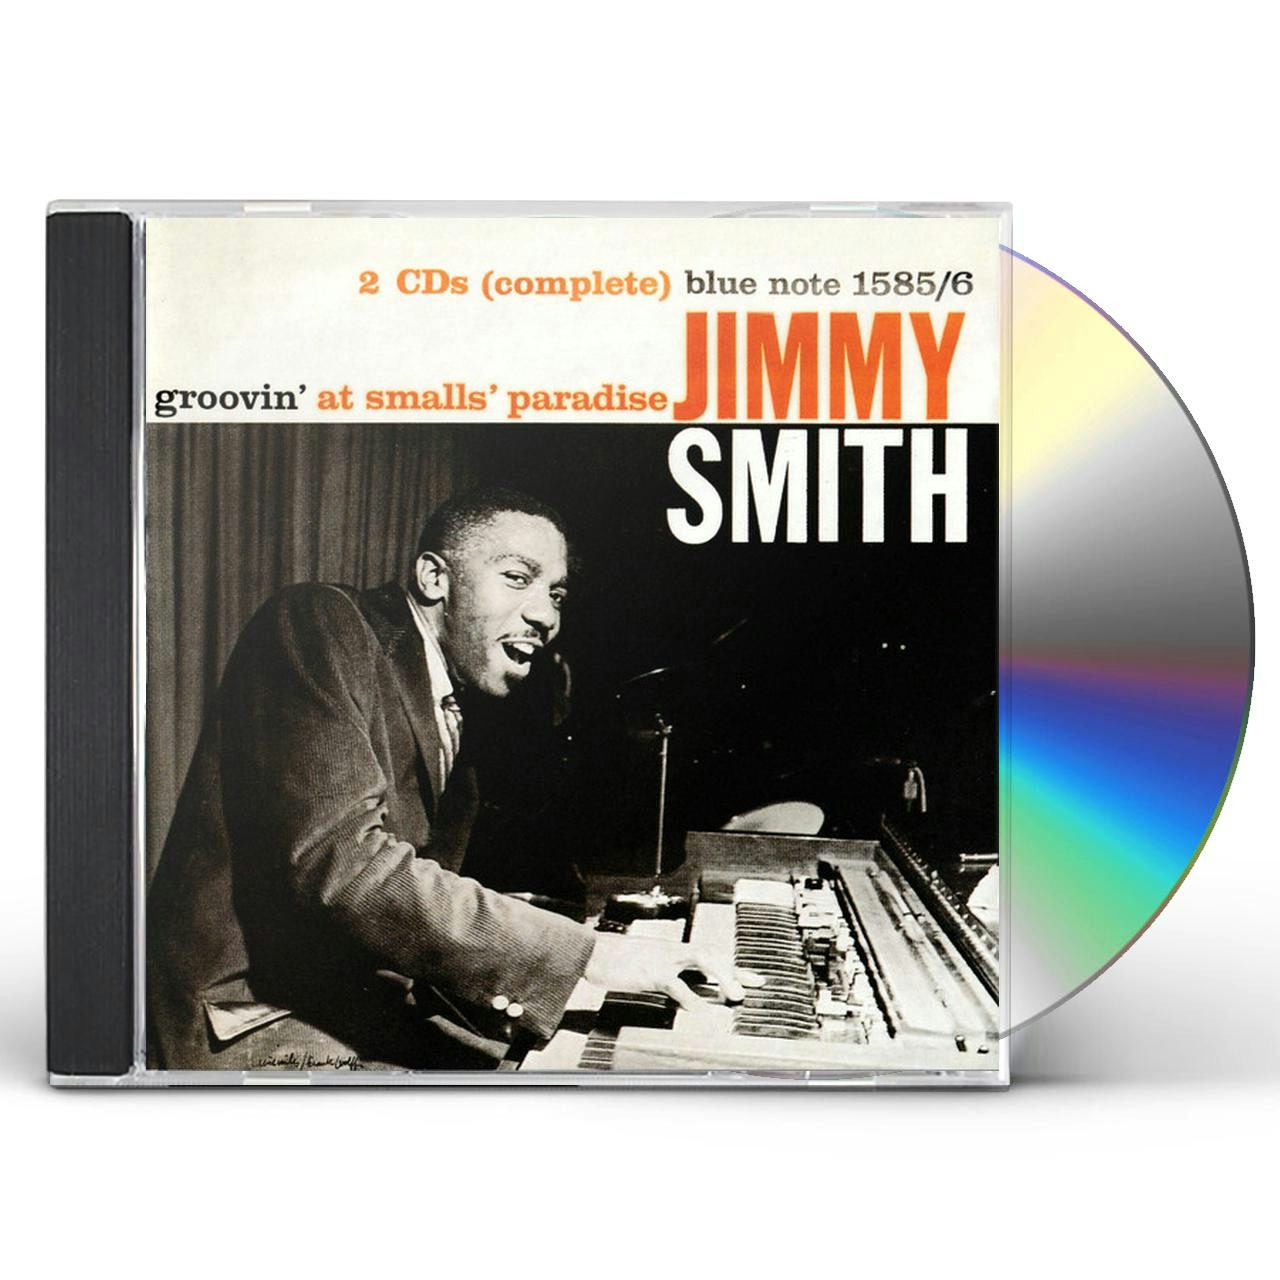 JIMMY SMITH groovin' at smalls' paradise